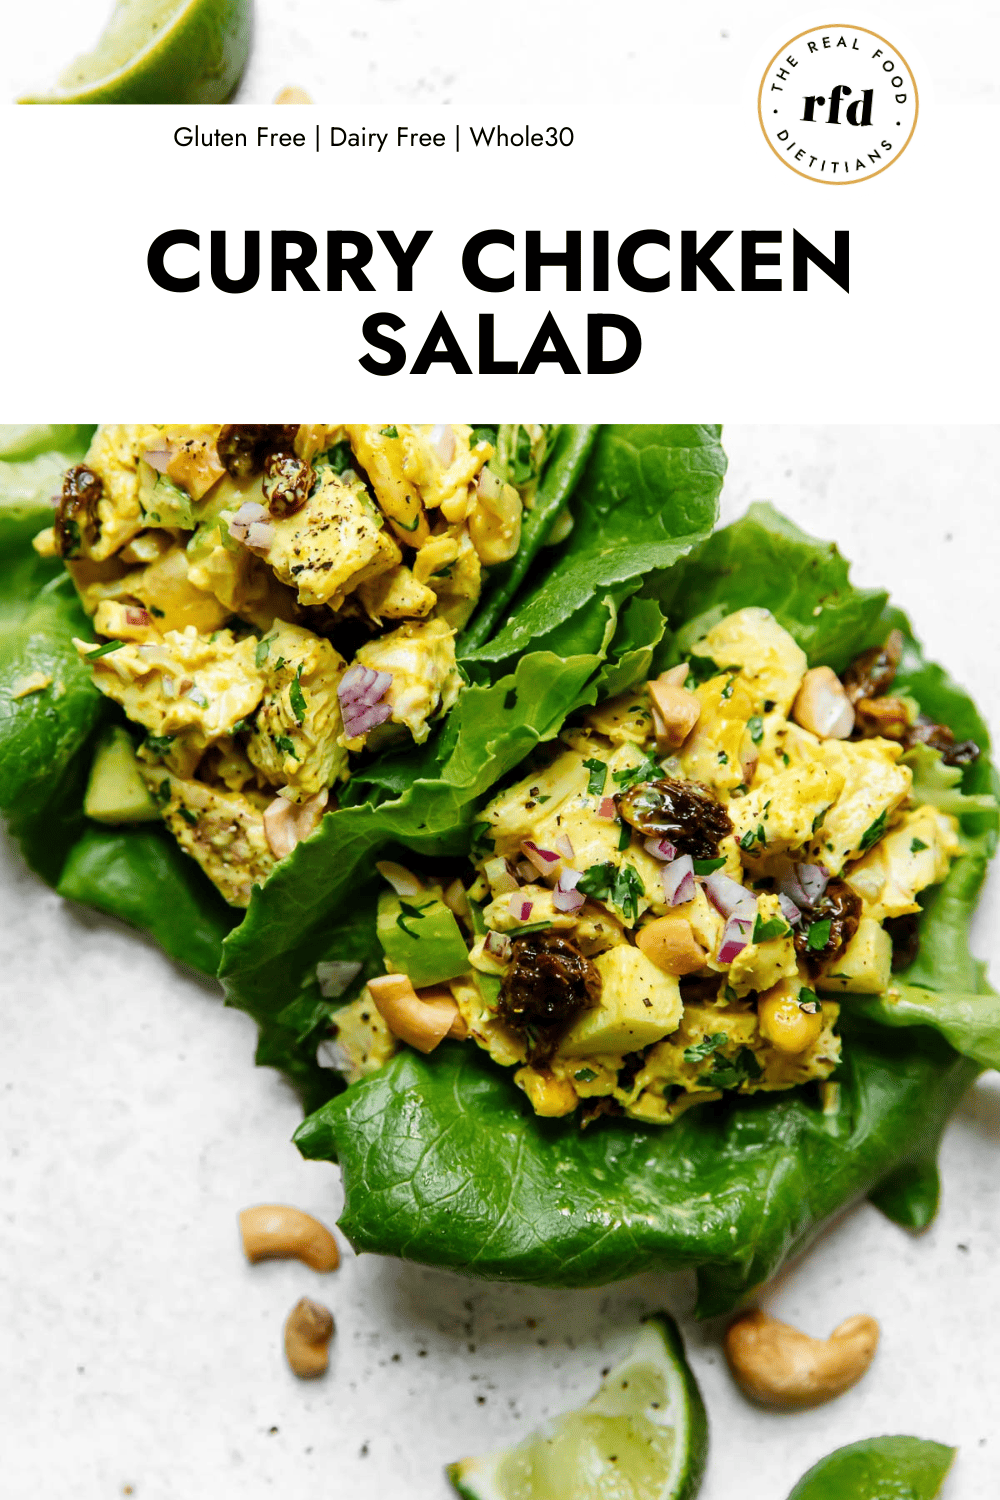 https://therealfooddietitians.com/wp-content/uploads/2023/05/Curry-Chicken-Salad-1000-%C3%97-1500-px.png